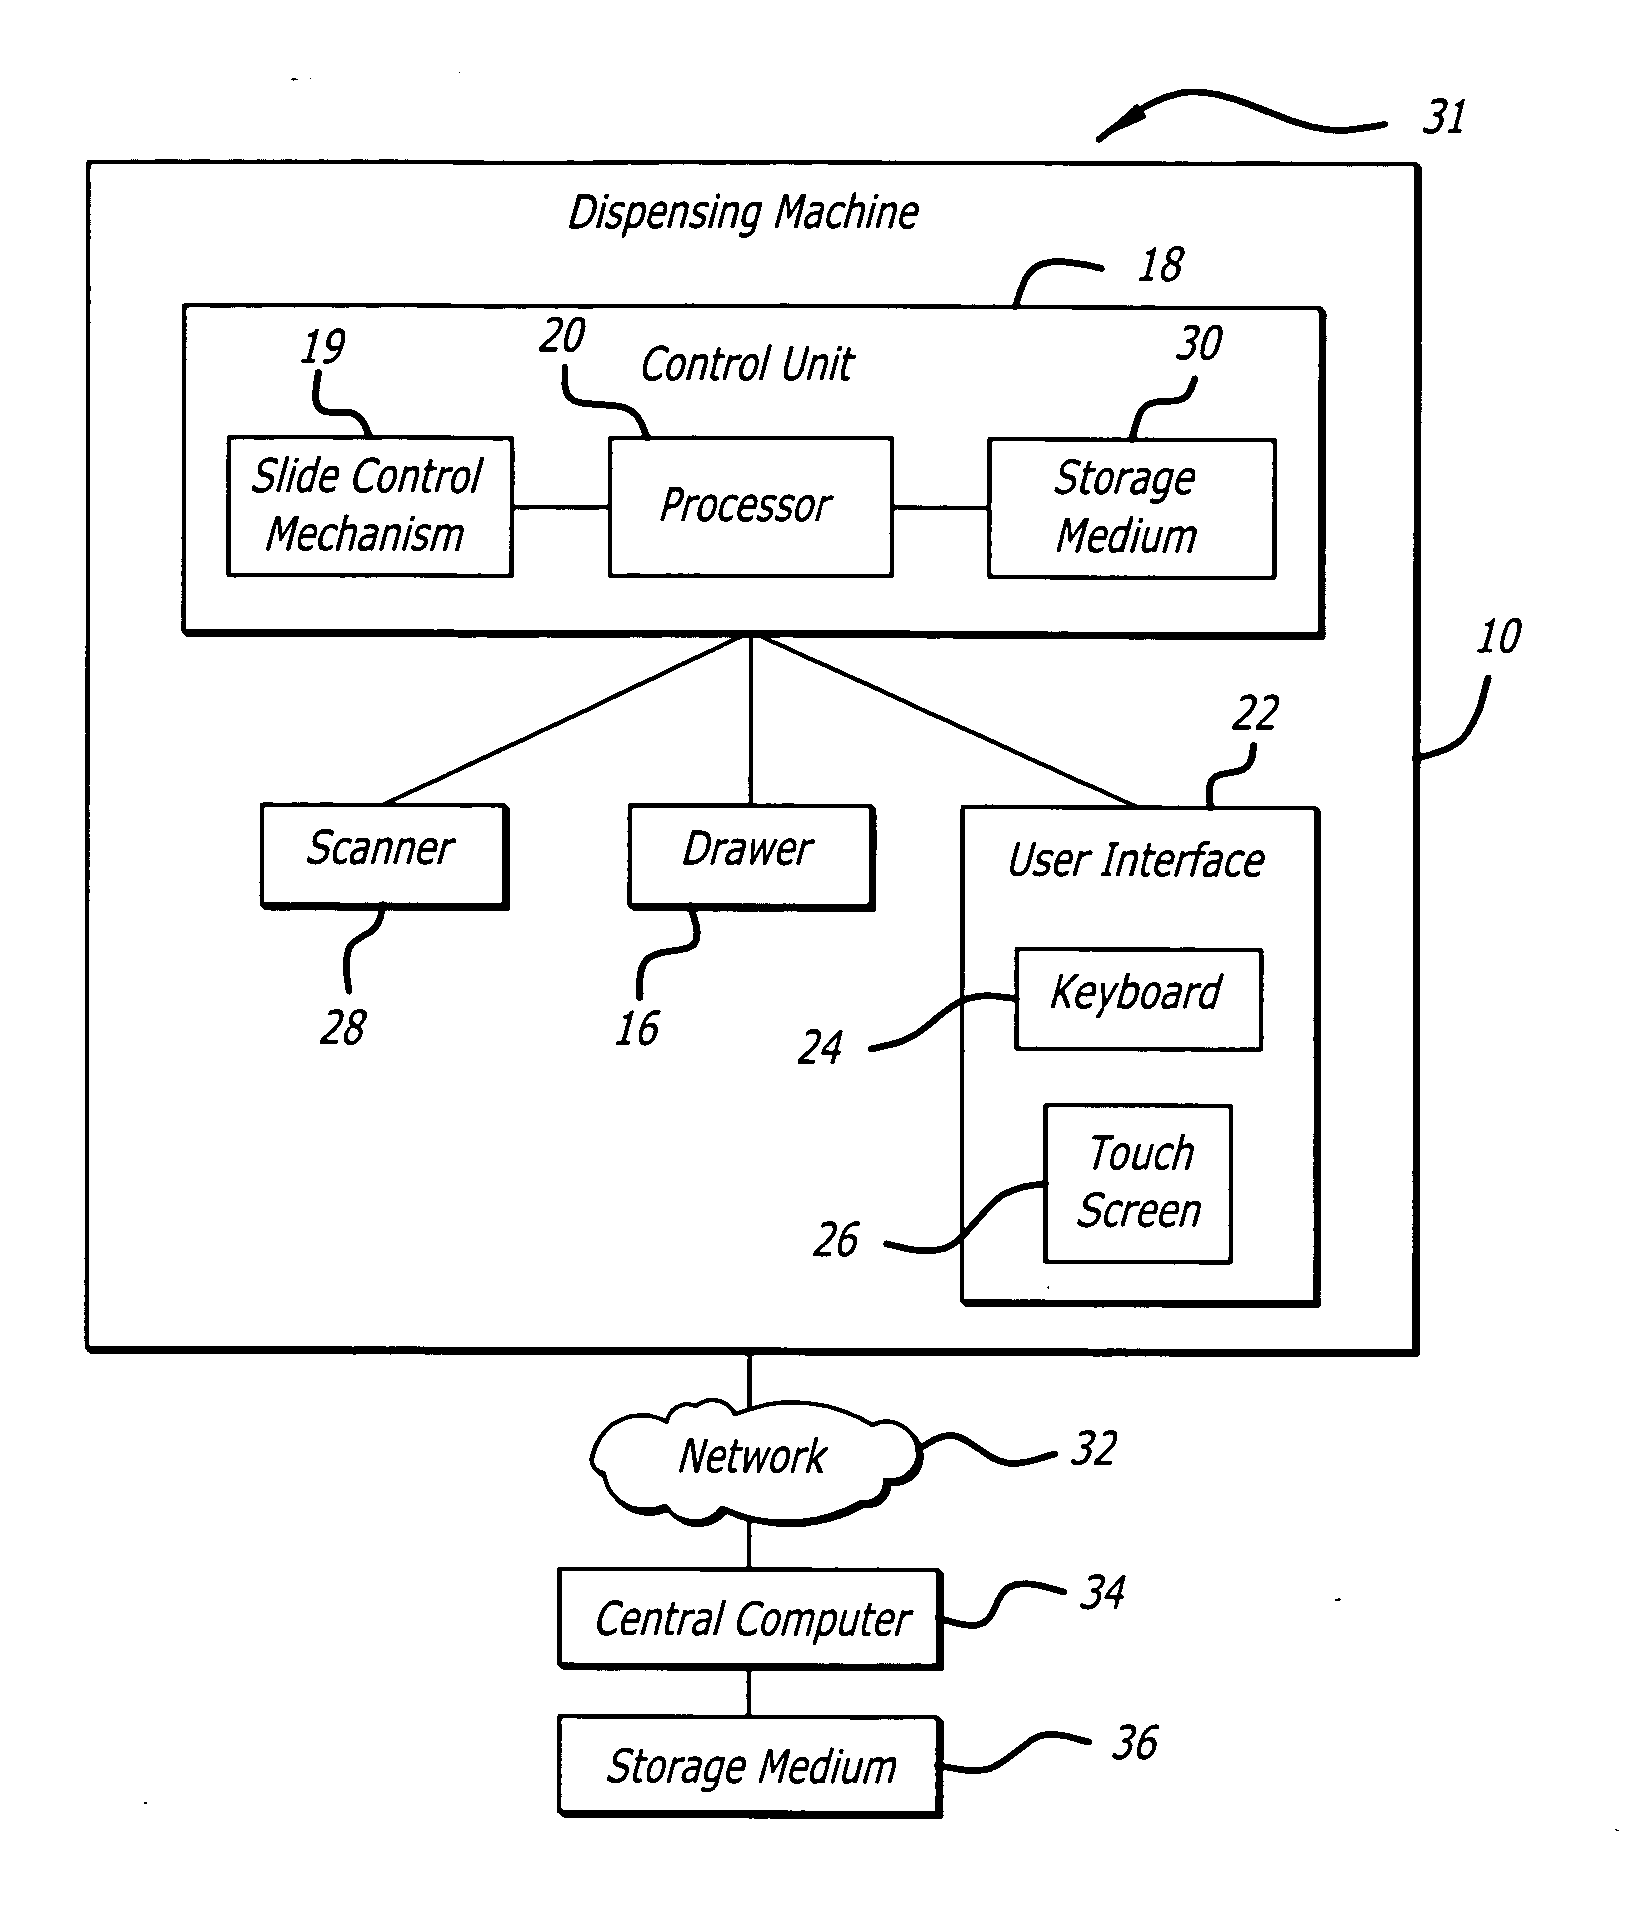 System and method for storing items and tracking item usage